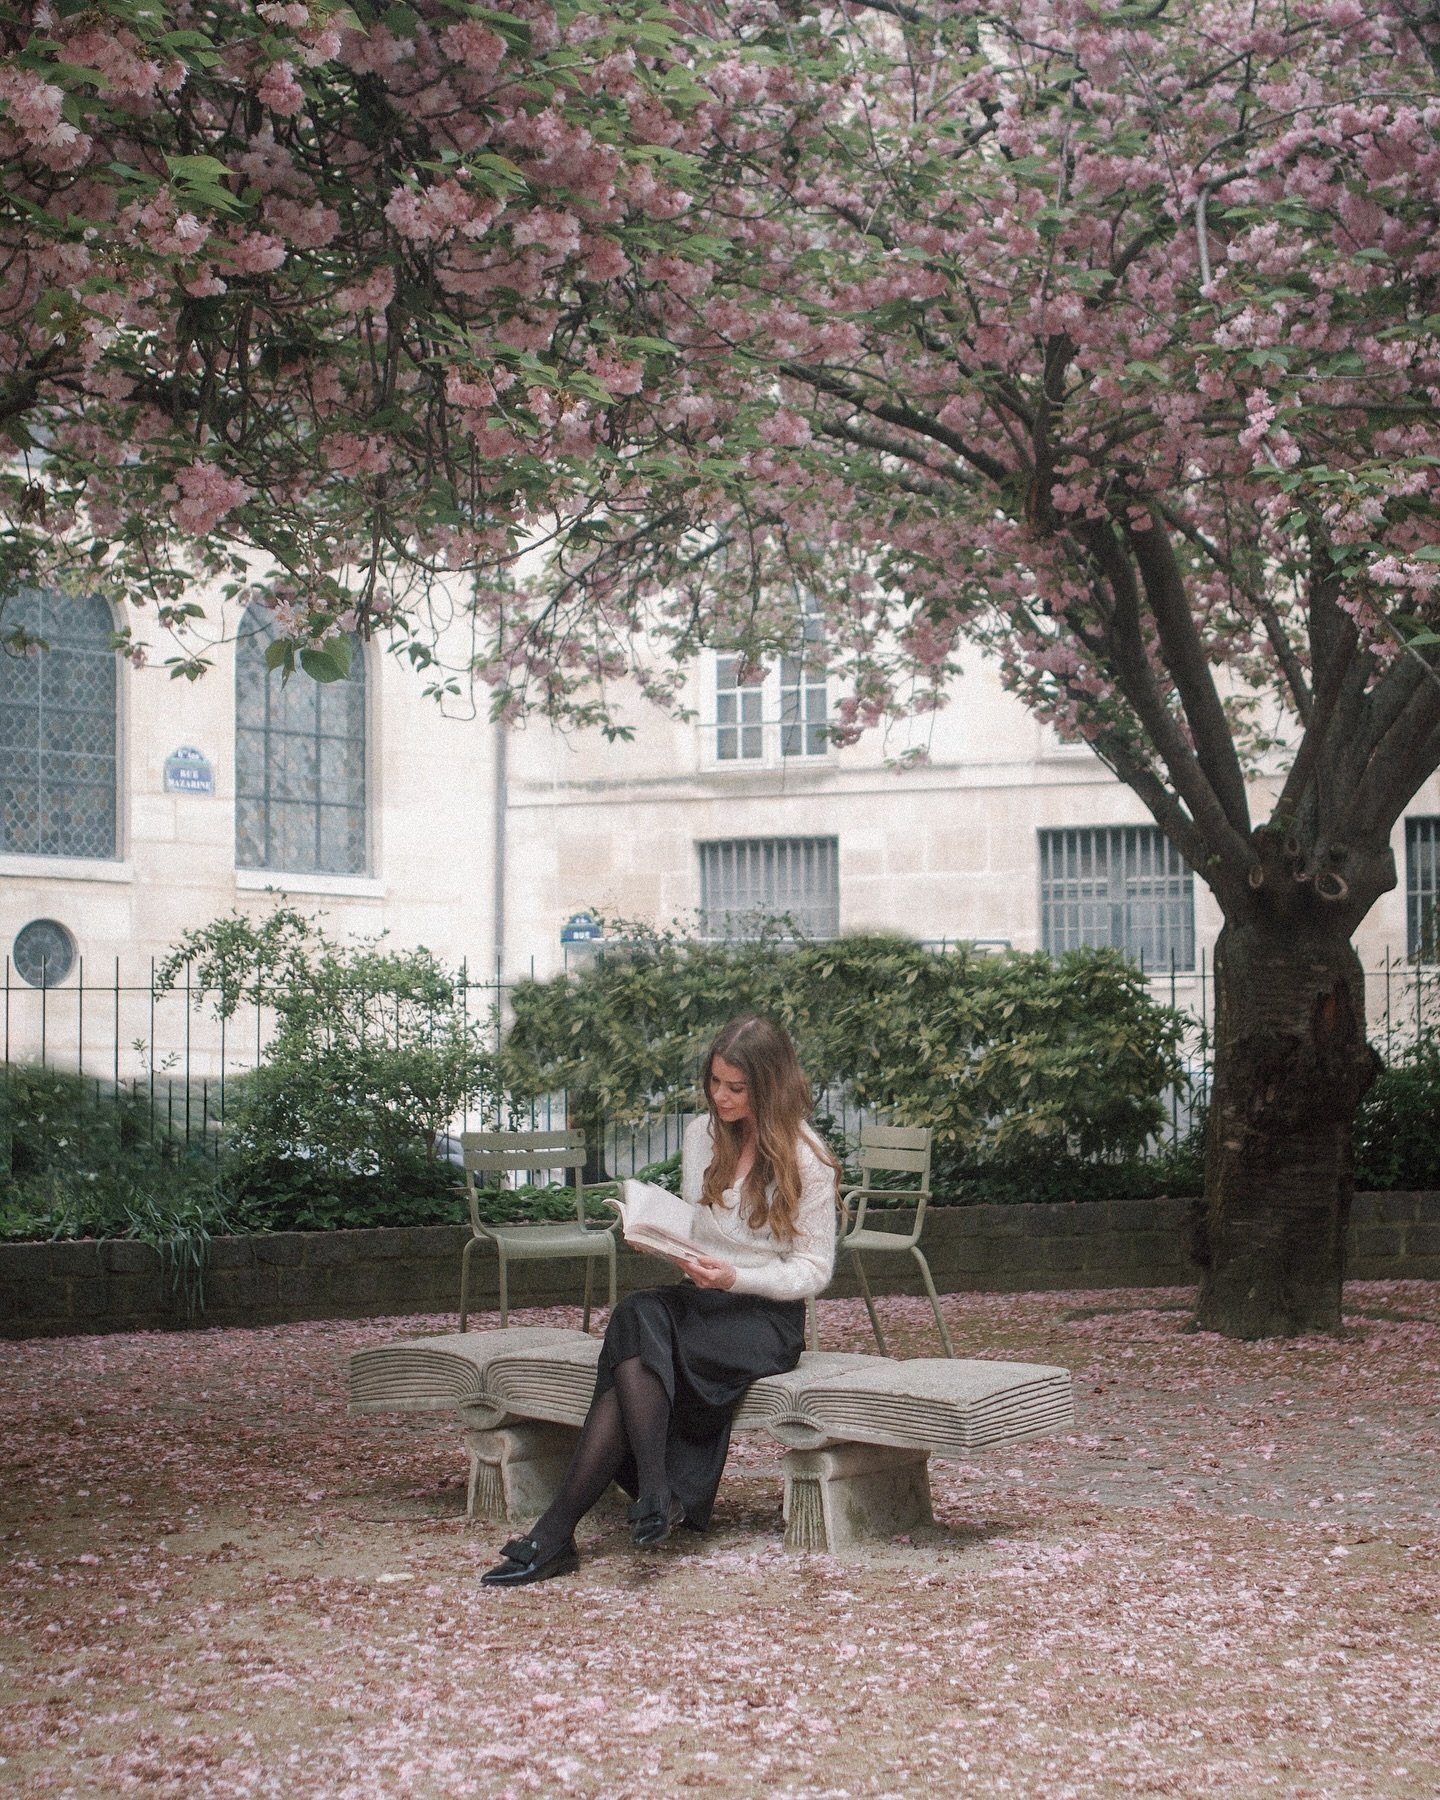 I was so sad to miss the blossom trees in Paris last year. They bloomed and withered in the space between me going back to the uk and deciding to move here.

A friend told me it was a good thing, that it meant I had something to come back for and loo